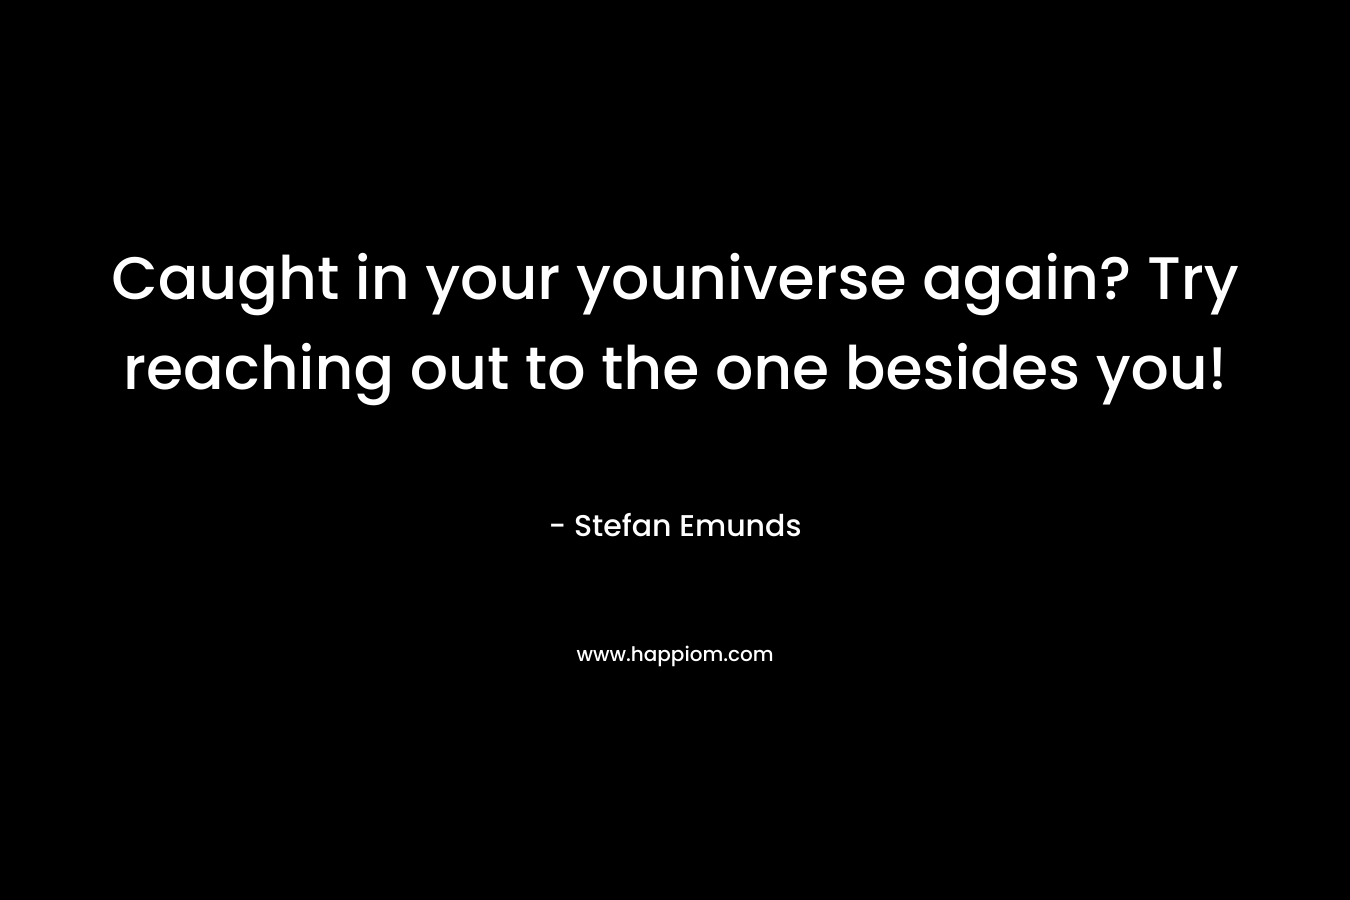 Caught in your youniverse again? Try reaching out to the one besides you! – Stefan Emunds